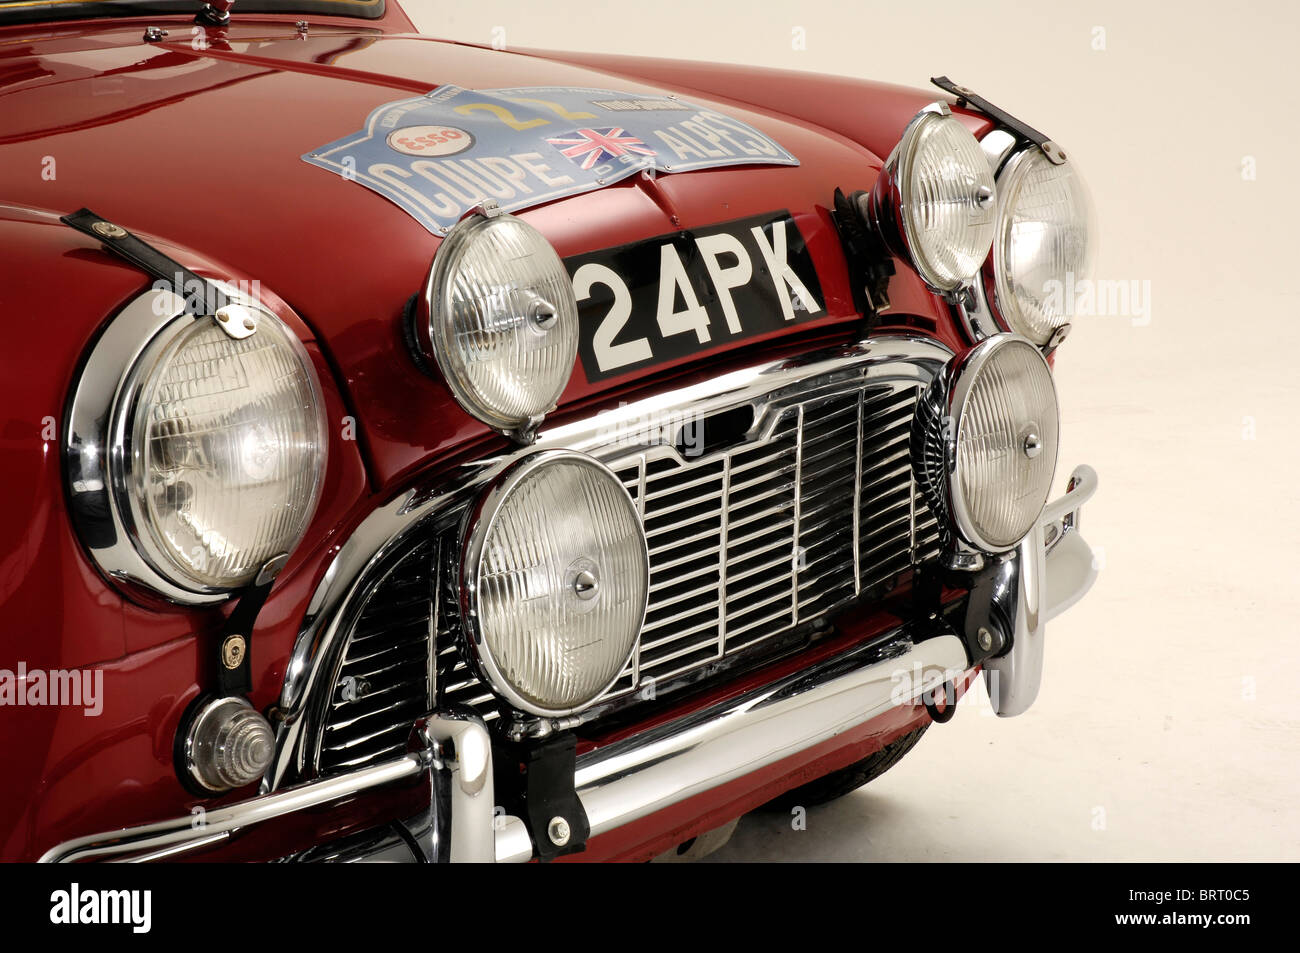 Red Mini Cooper Classic High Resolution Stock Photography and Images - Alamy